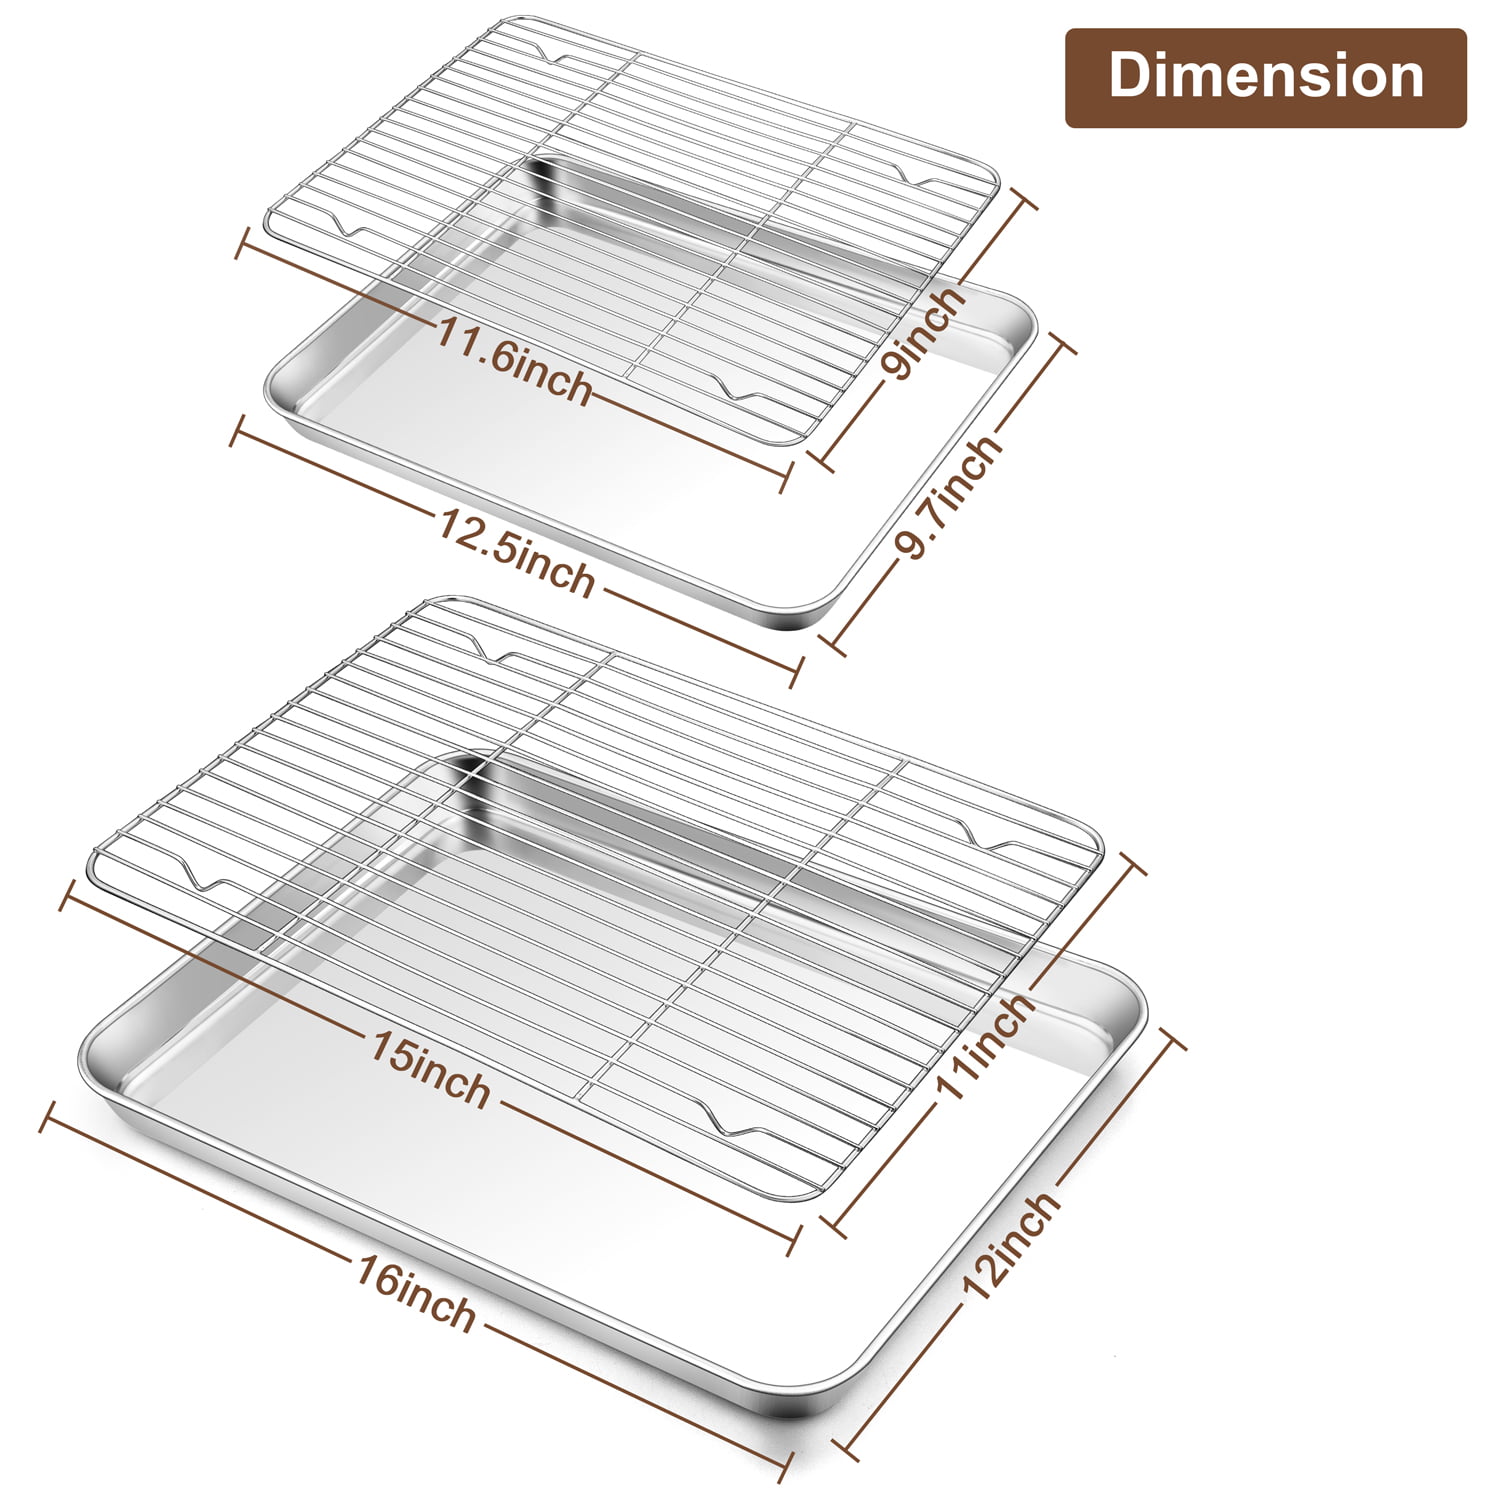 Walchoice Large Baking Sheet Set of 2, Stainless Steel Cookie Sheets for  Baking Serving, Metal Oven Trays - 17.7” x 13.2” x 1” 